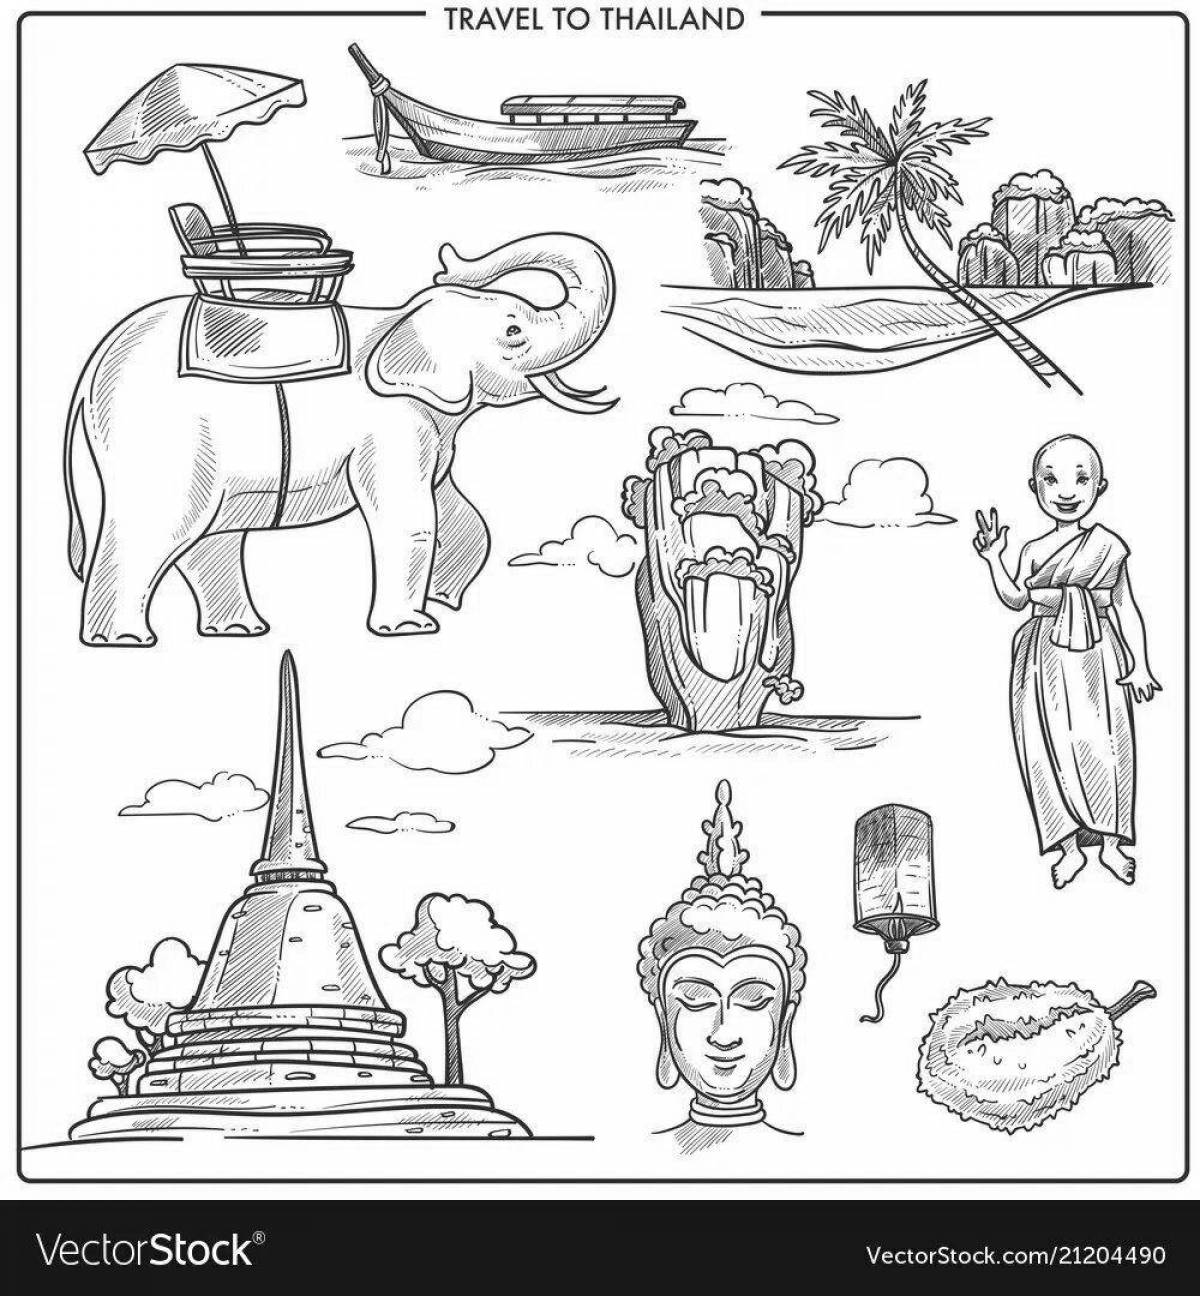 Playful thailand coloring page